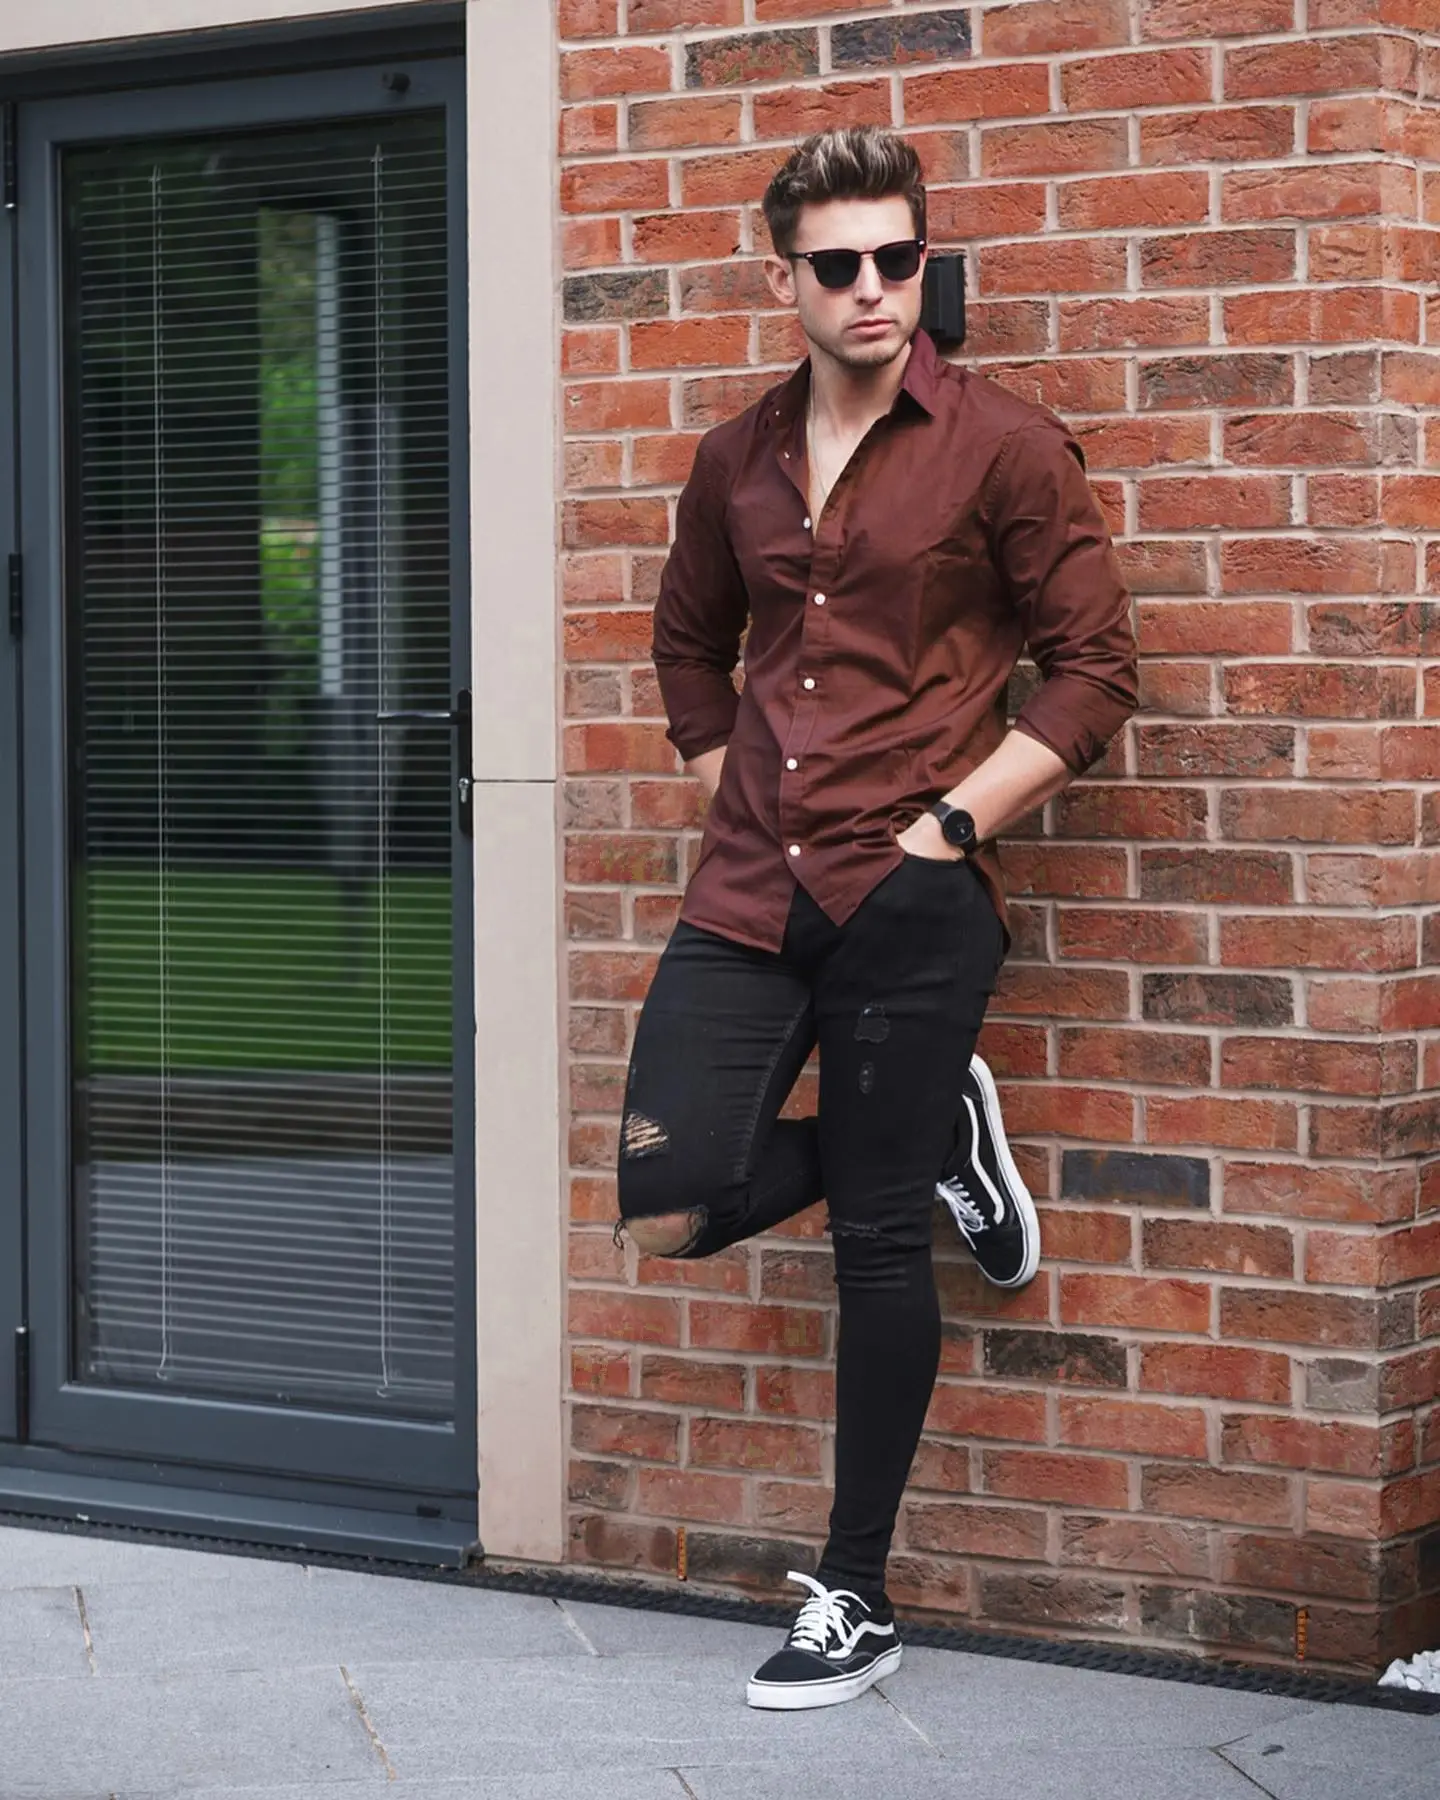 Dark Brown Pant Shirt Combination For Men  Matching Shirt With Dark Brown  Pant  by Look Stylish  YouTube